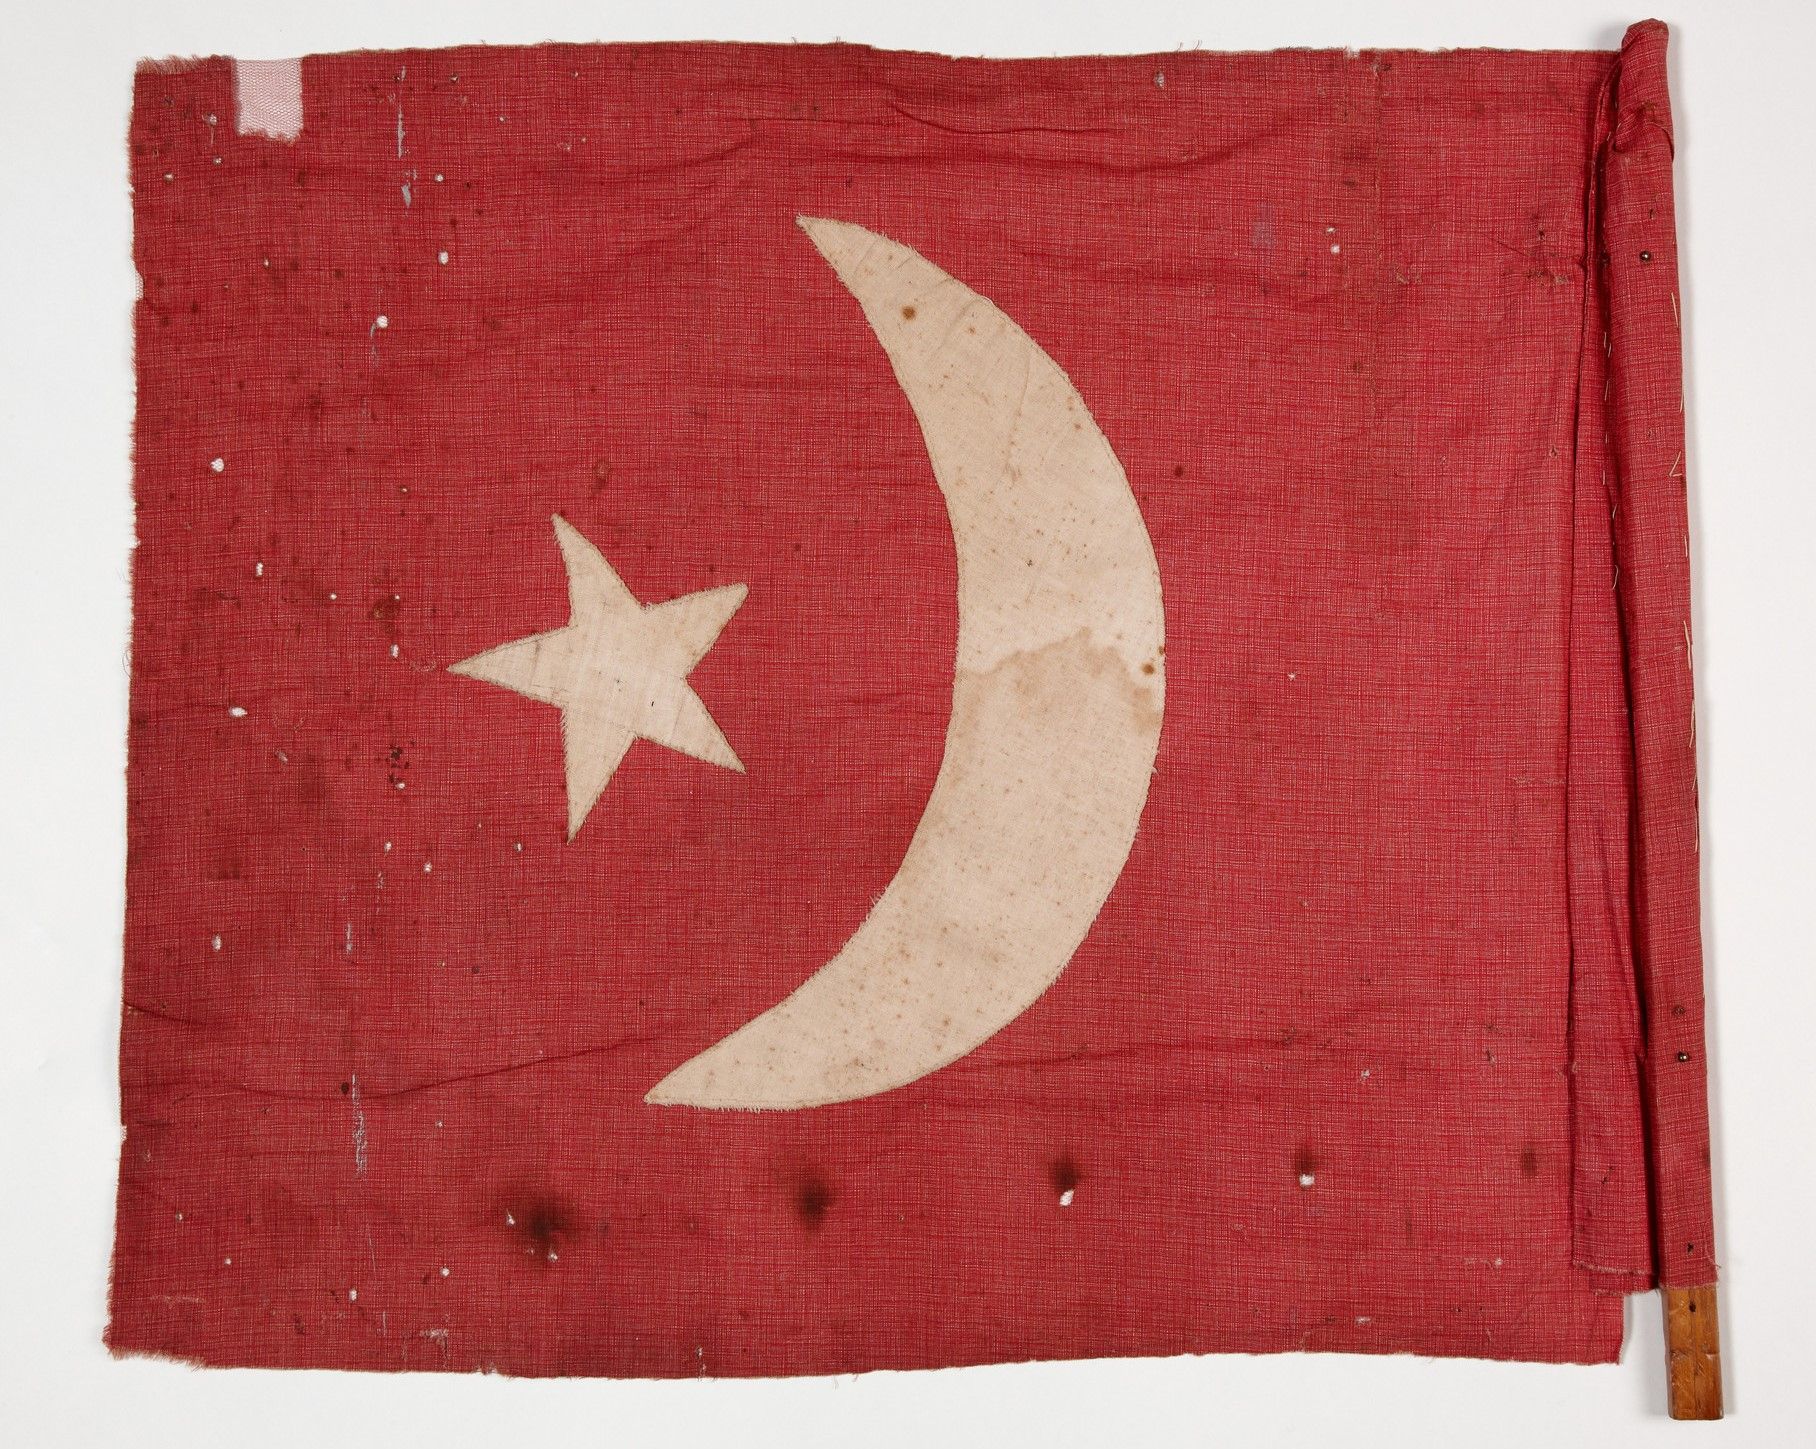 Flag with applied star and crescent moon, c1915